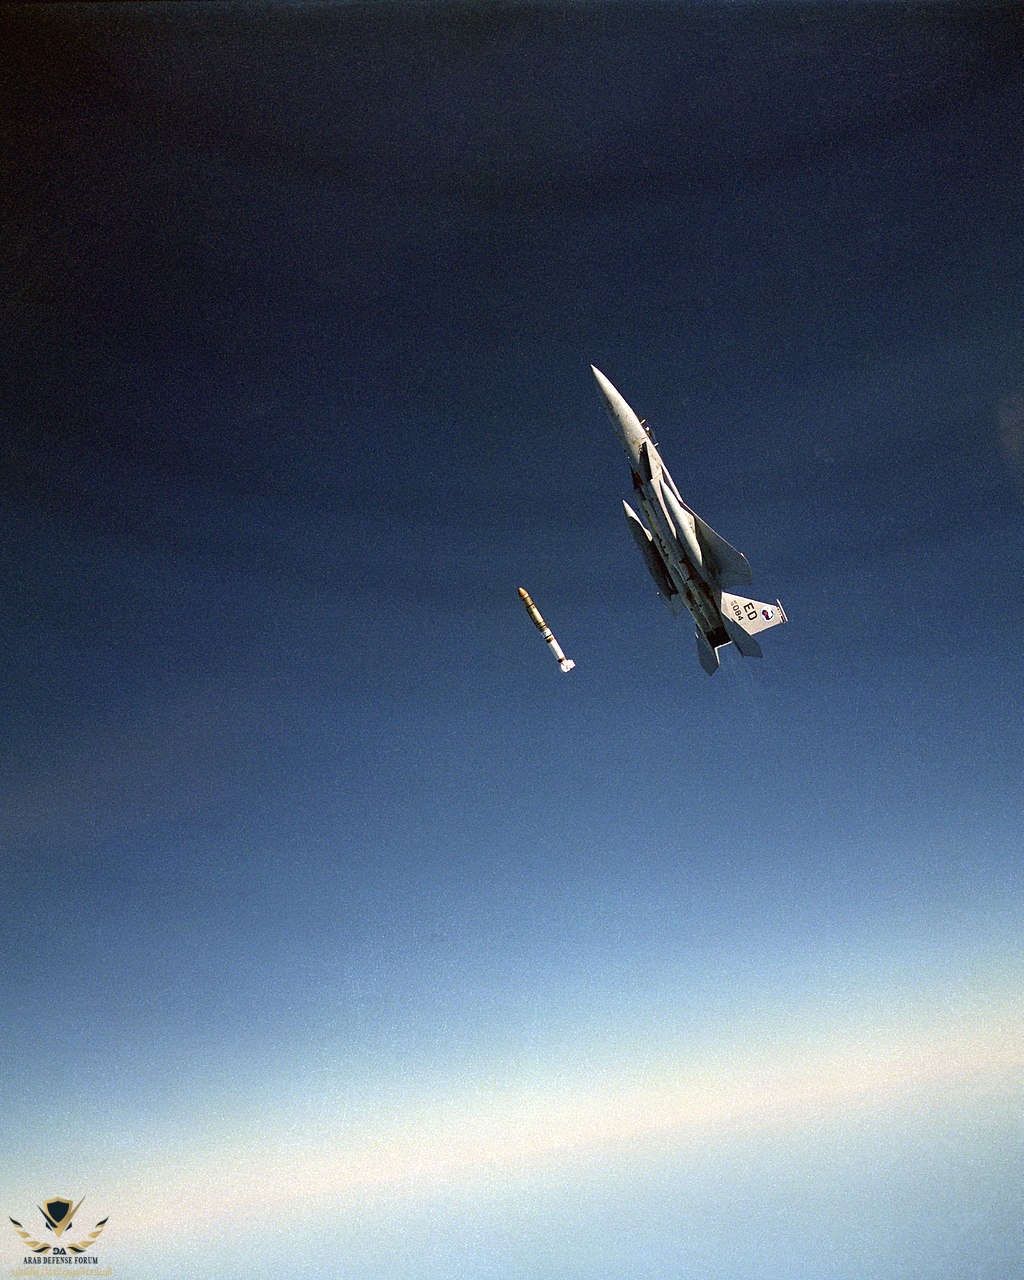 1024px-An_air-to-air_left_side_view_of_an_F-15_Eagle_aircraft_releasing_an_anti-satellite_(AS...jpeg